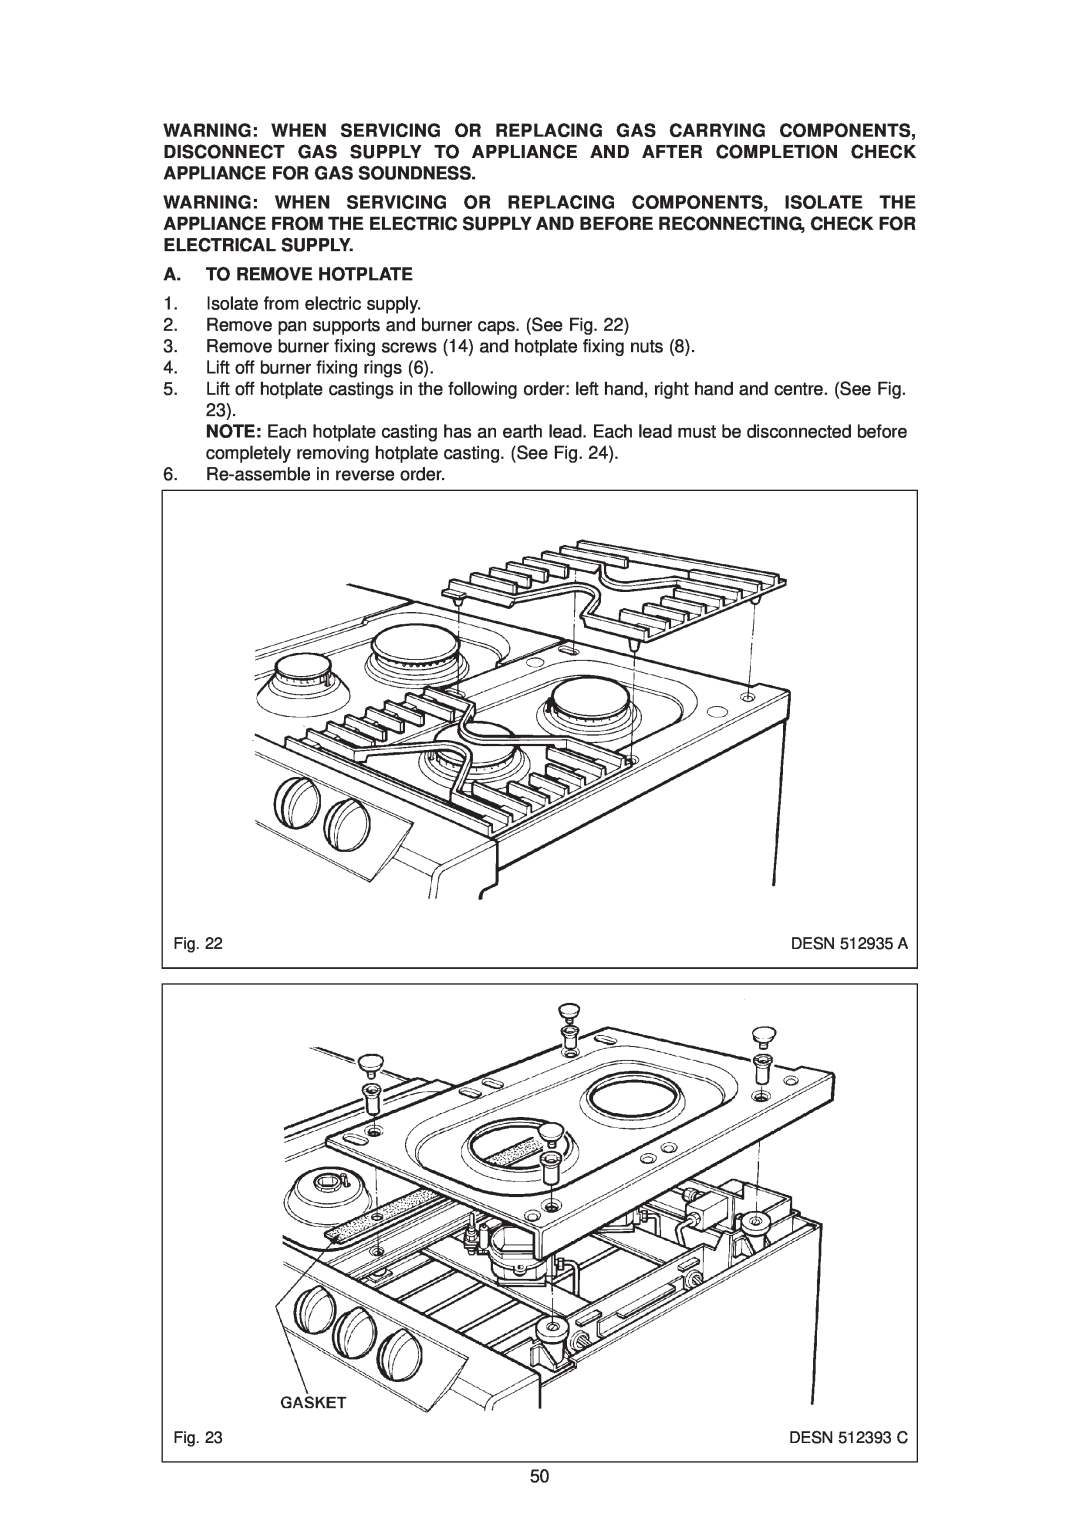 Aga Ranges dc6 owner manual A. To Remove Hotplate 